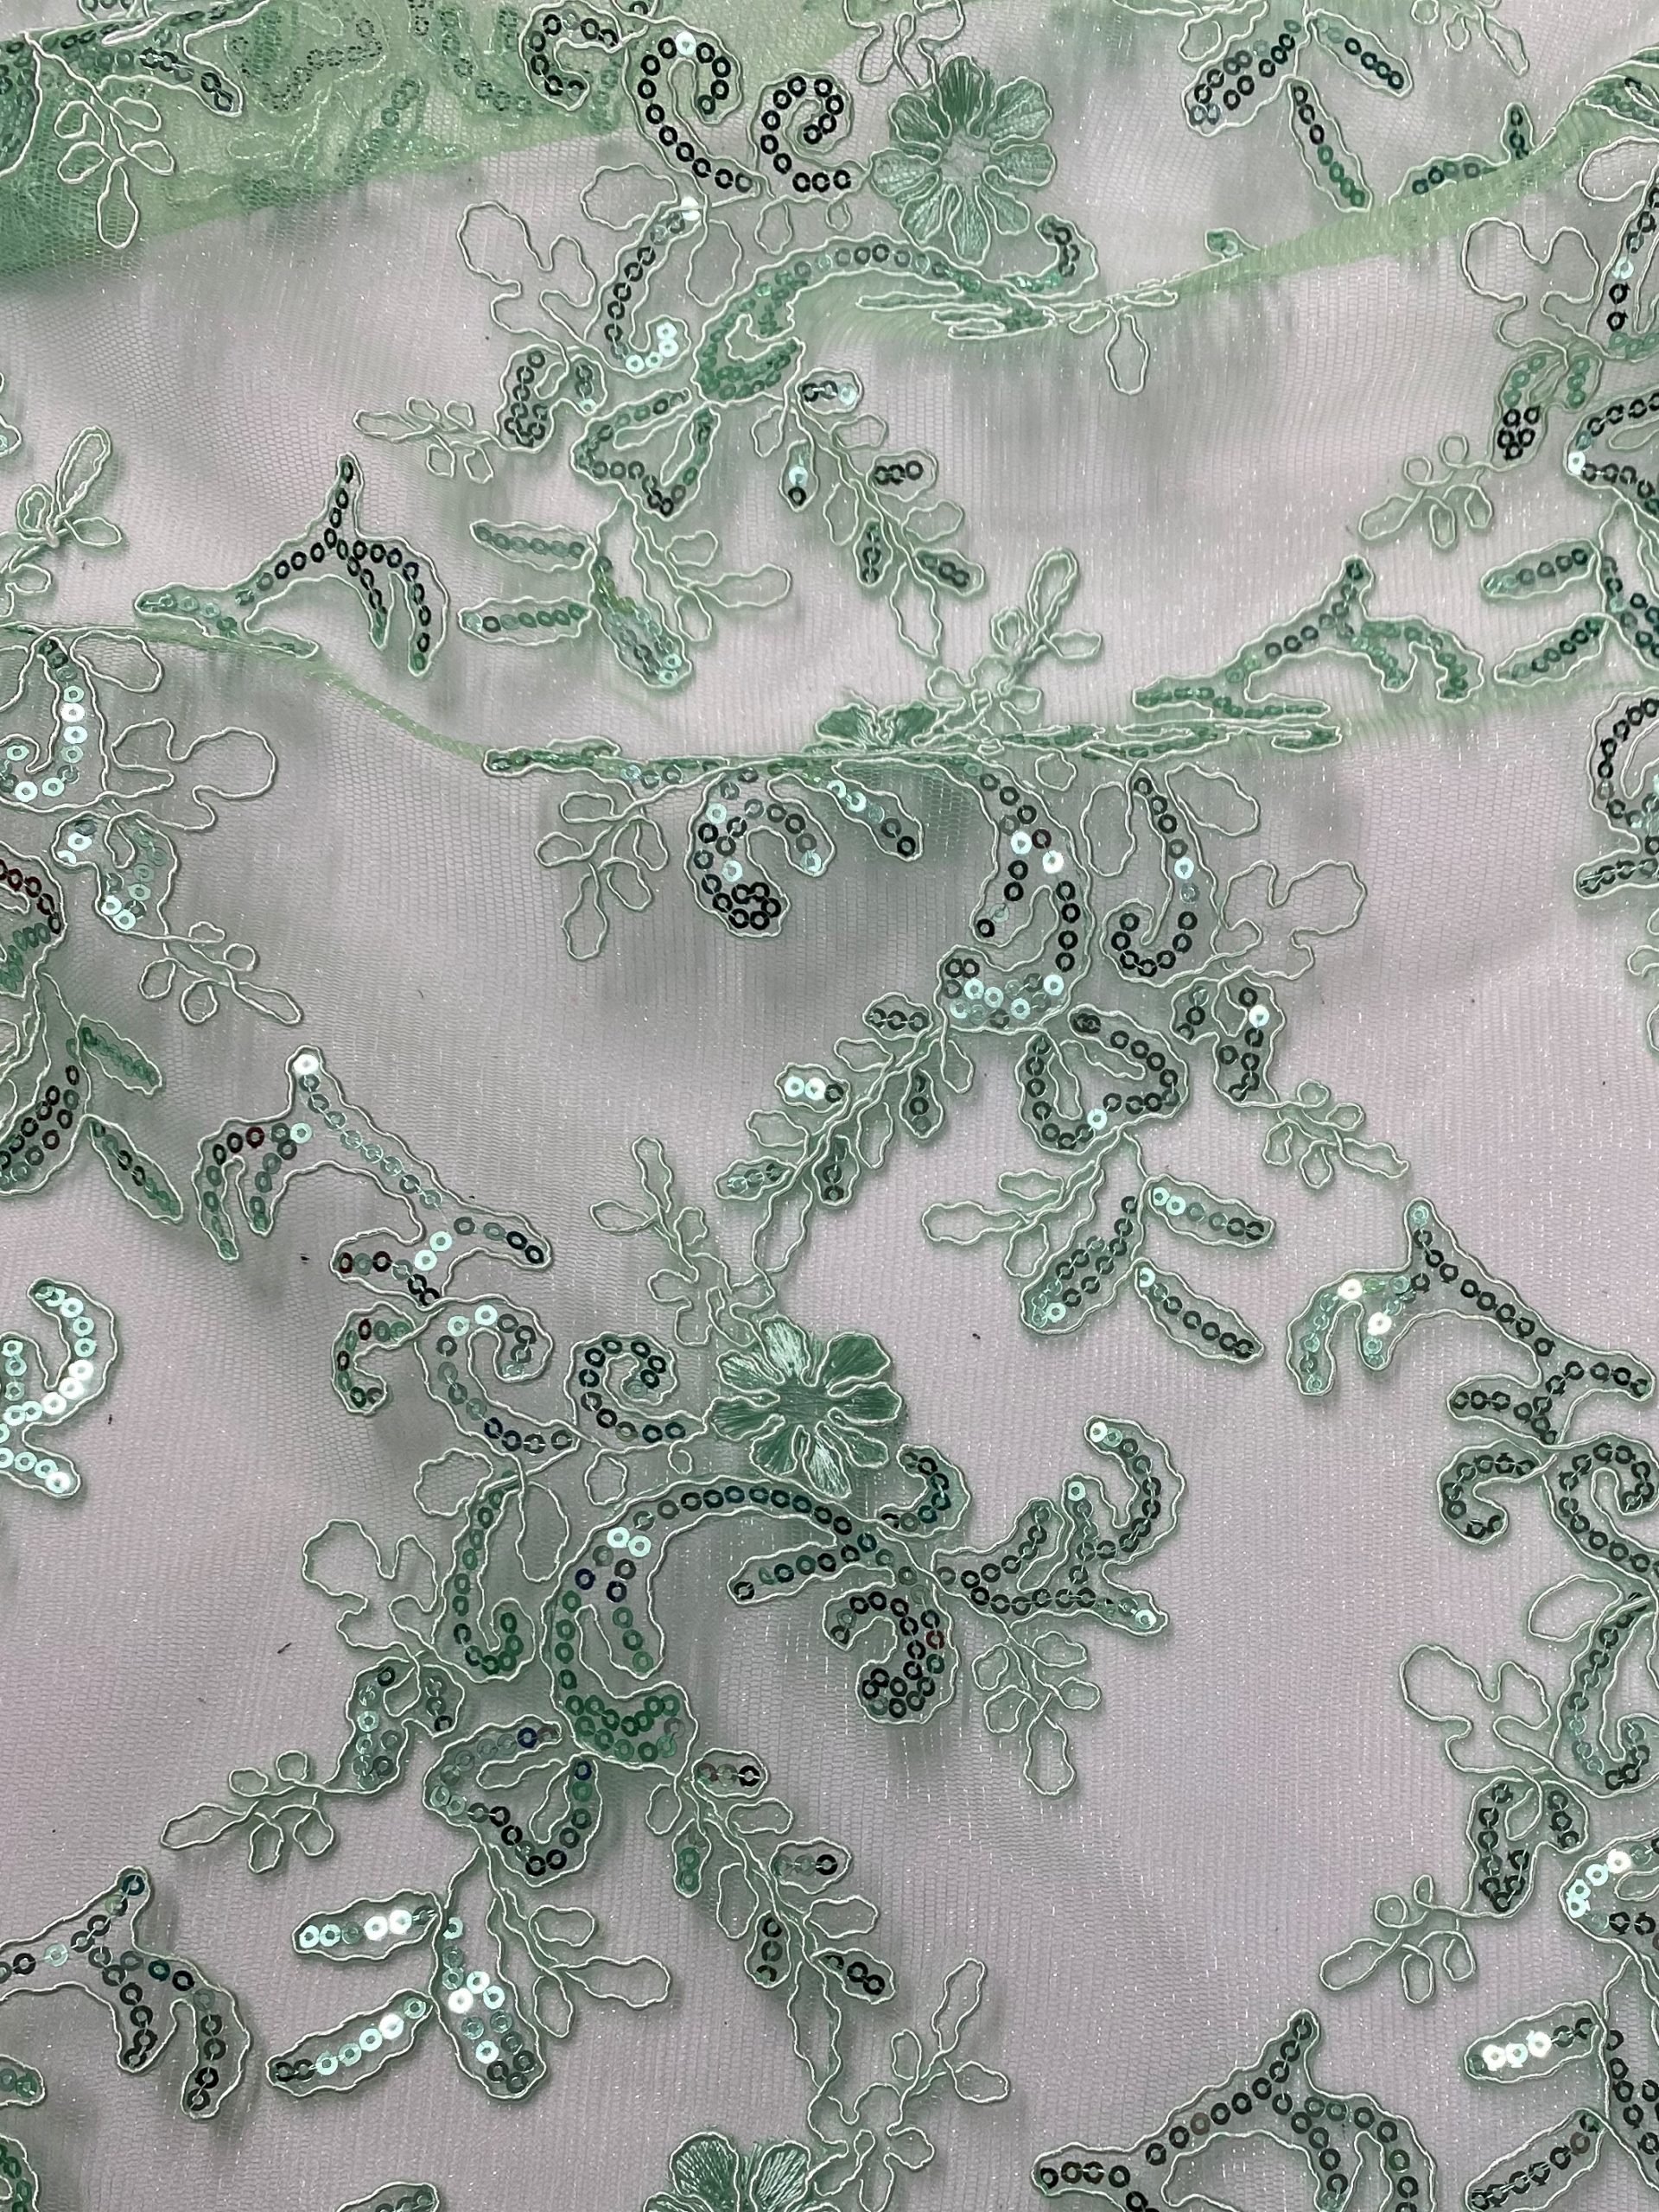 Mint green lace trim - Lace trim - lace fabric from